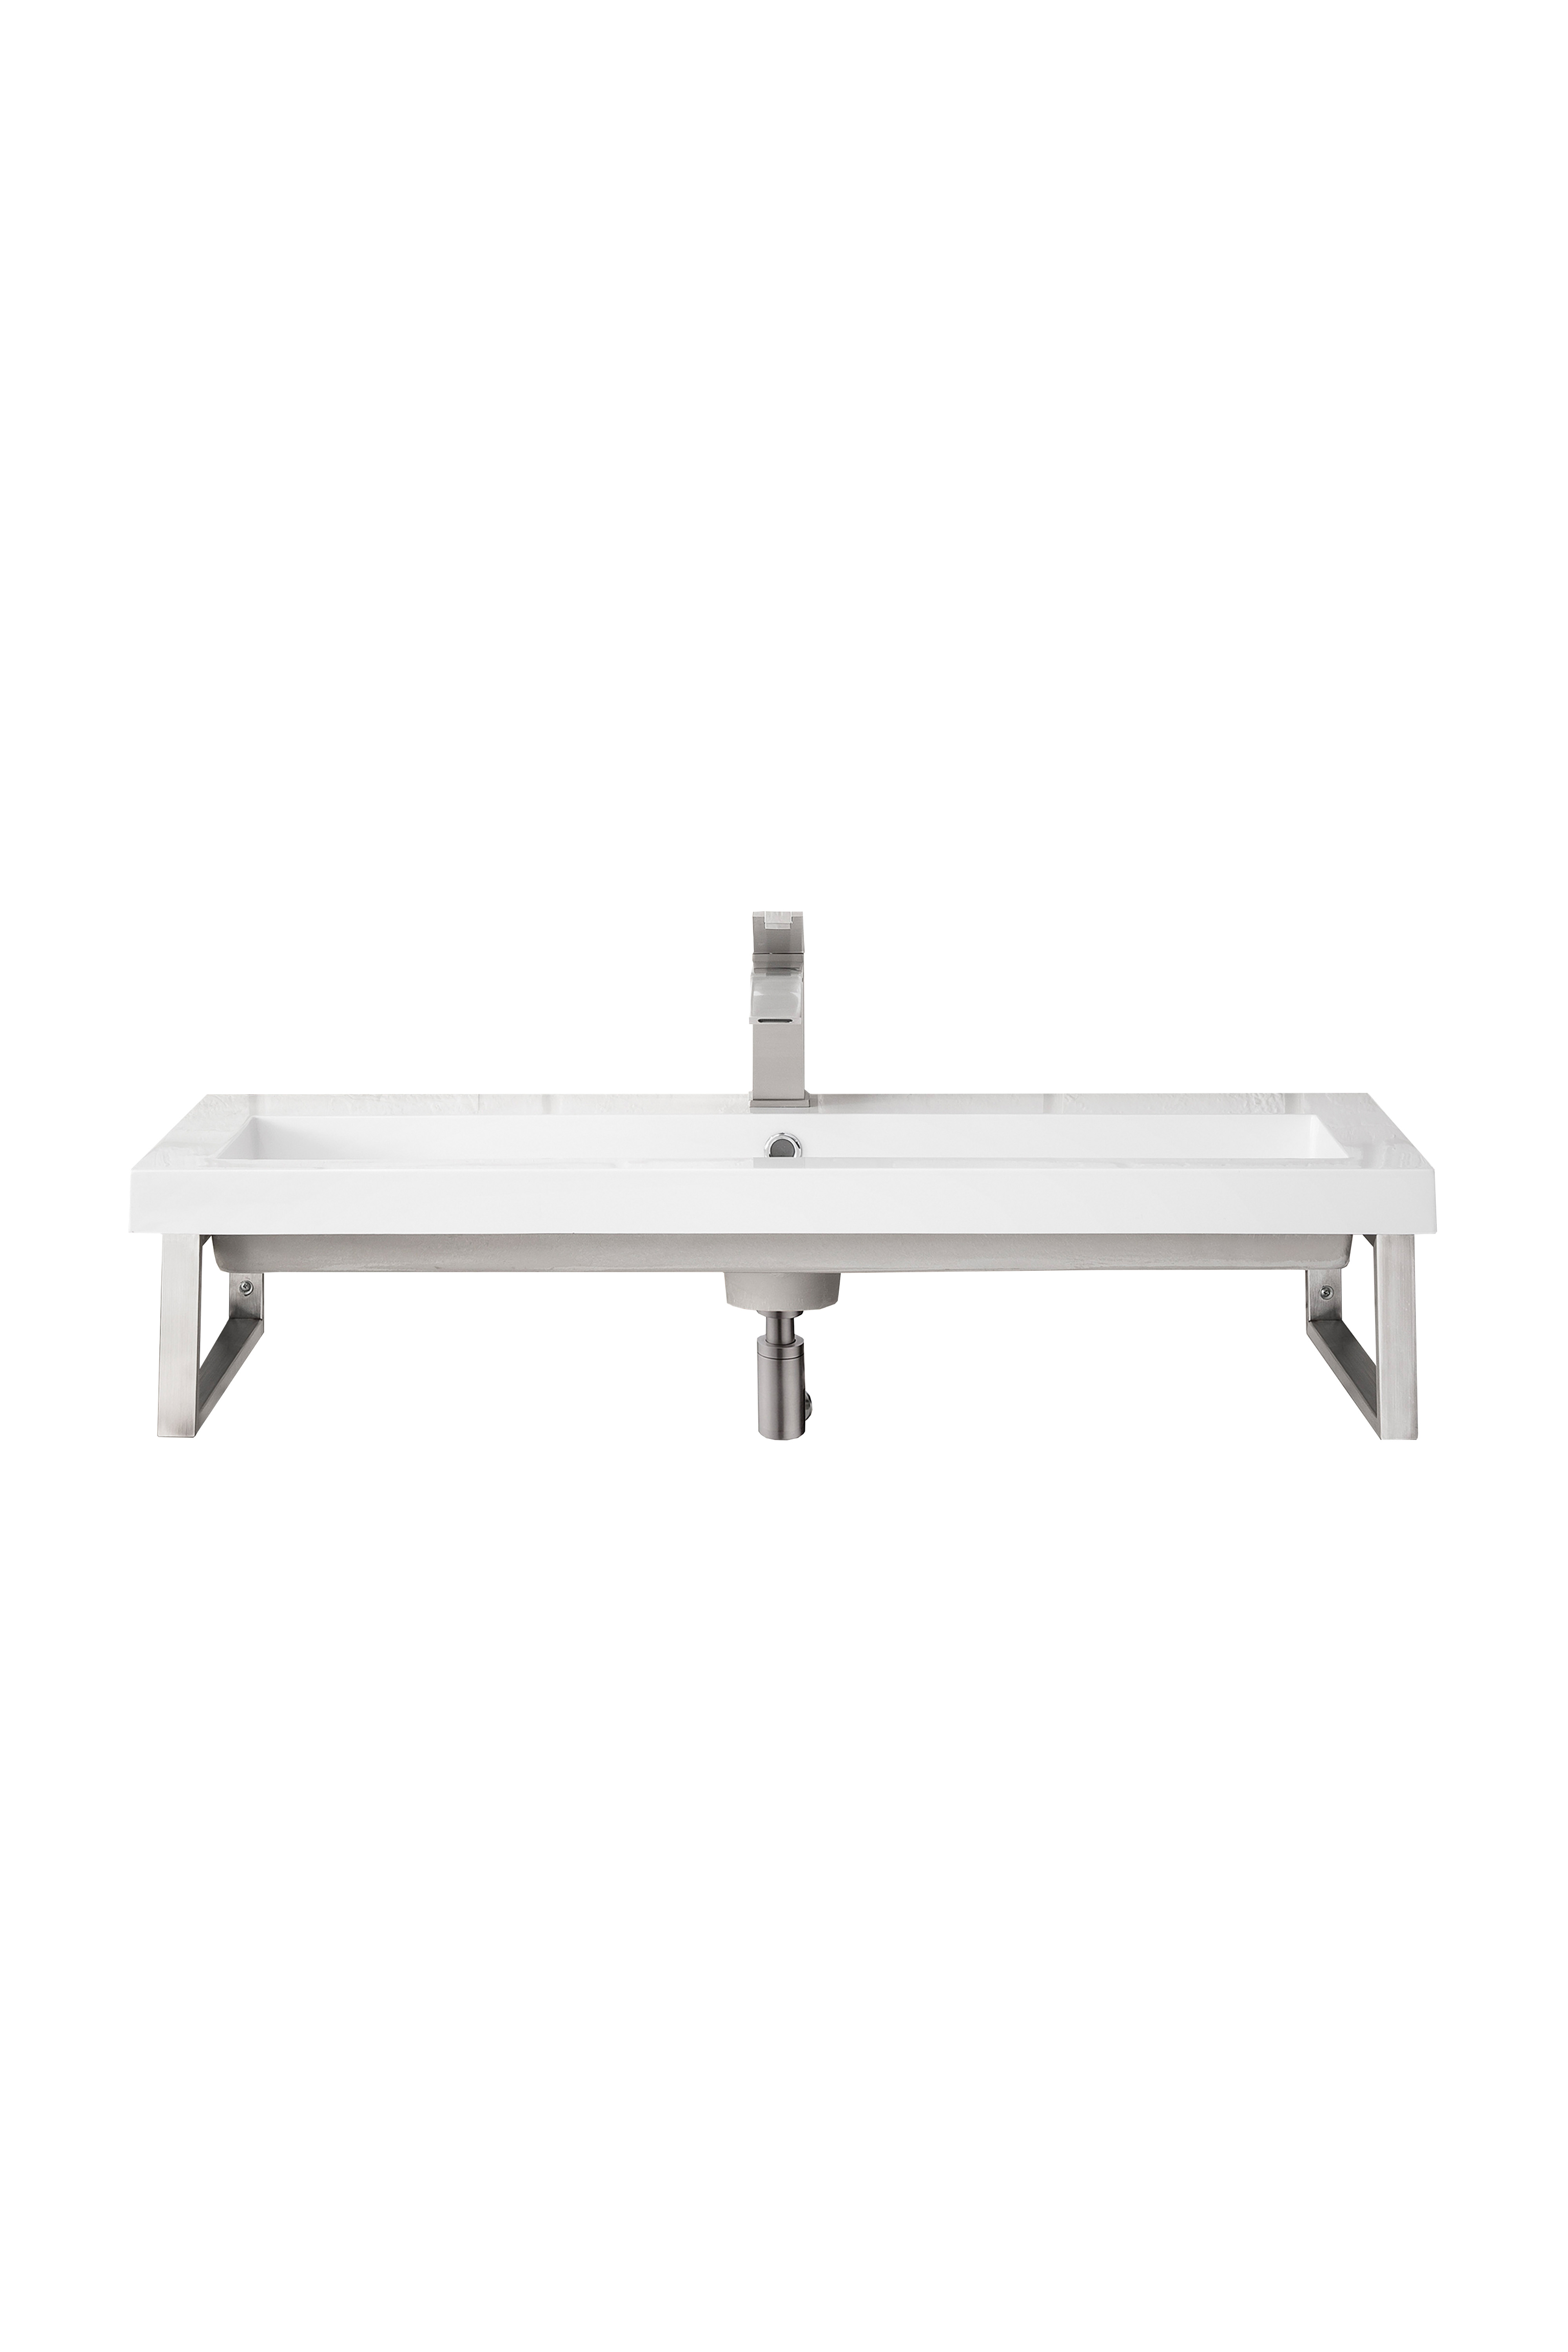 James Martin 055BK16BNK39.5WG2 Two Boston 15 1/4" Wall Brackets, Brushed Nickel w/39.5" White Glossy Composite Countertop - Click Image to Close